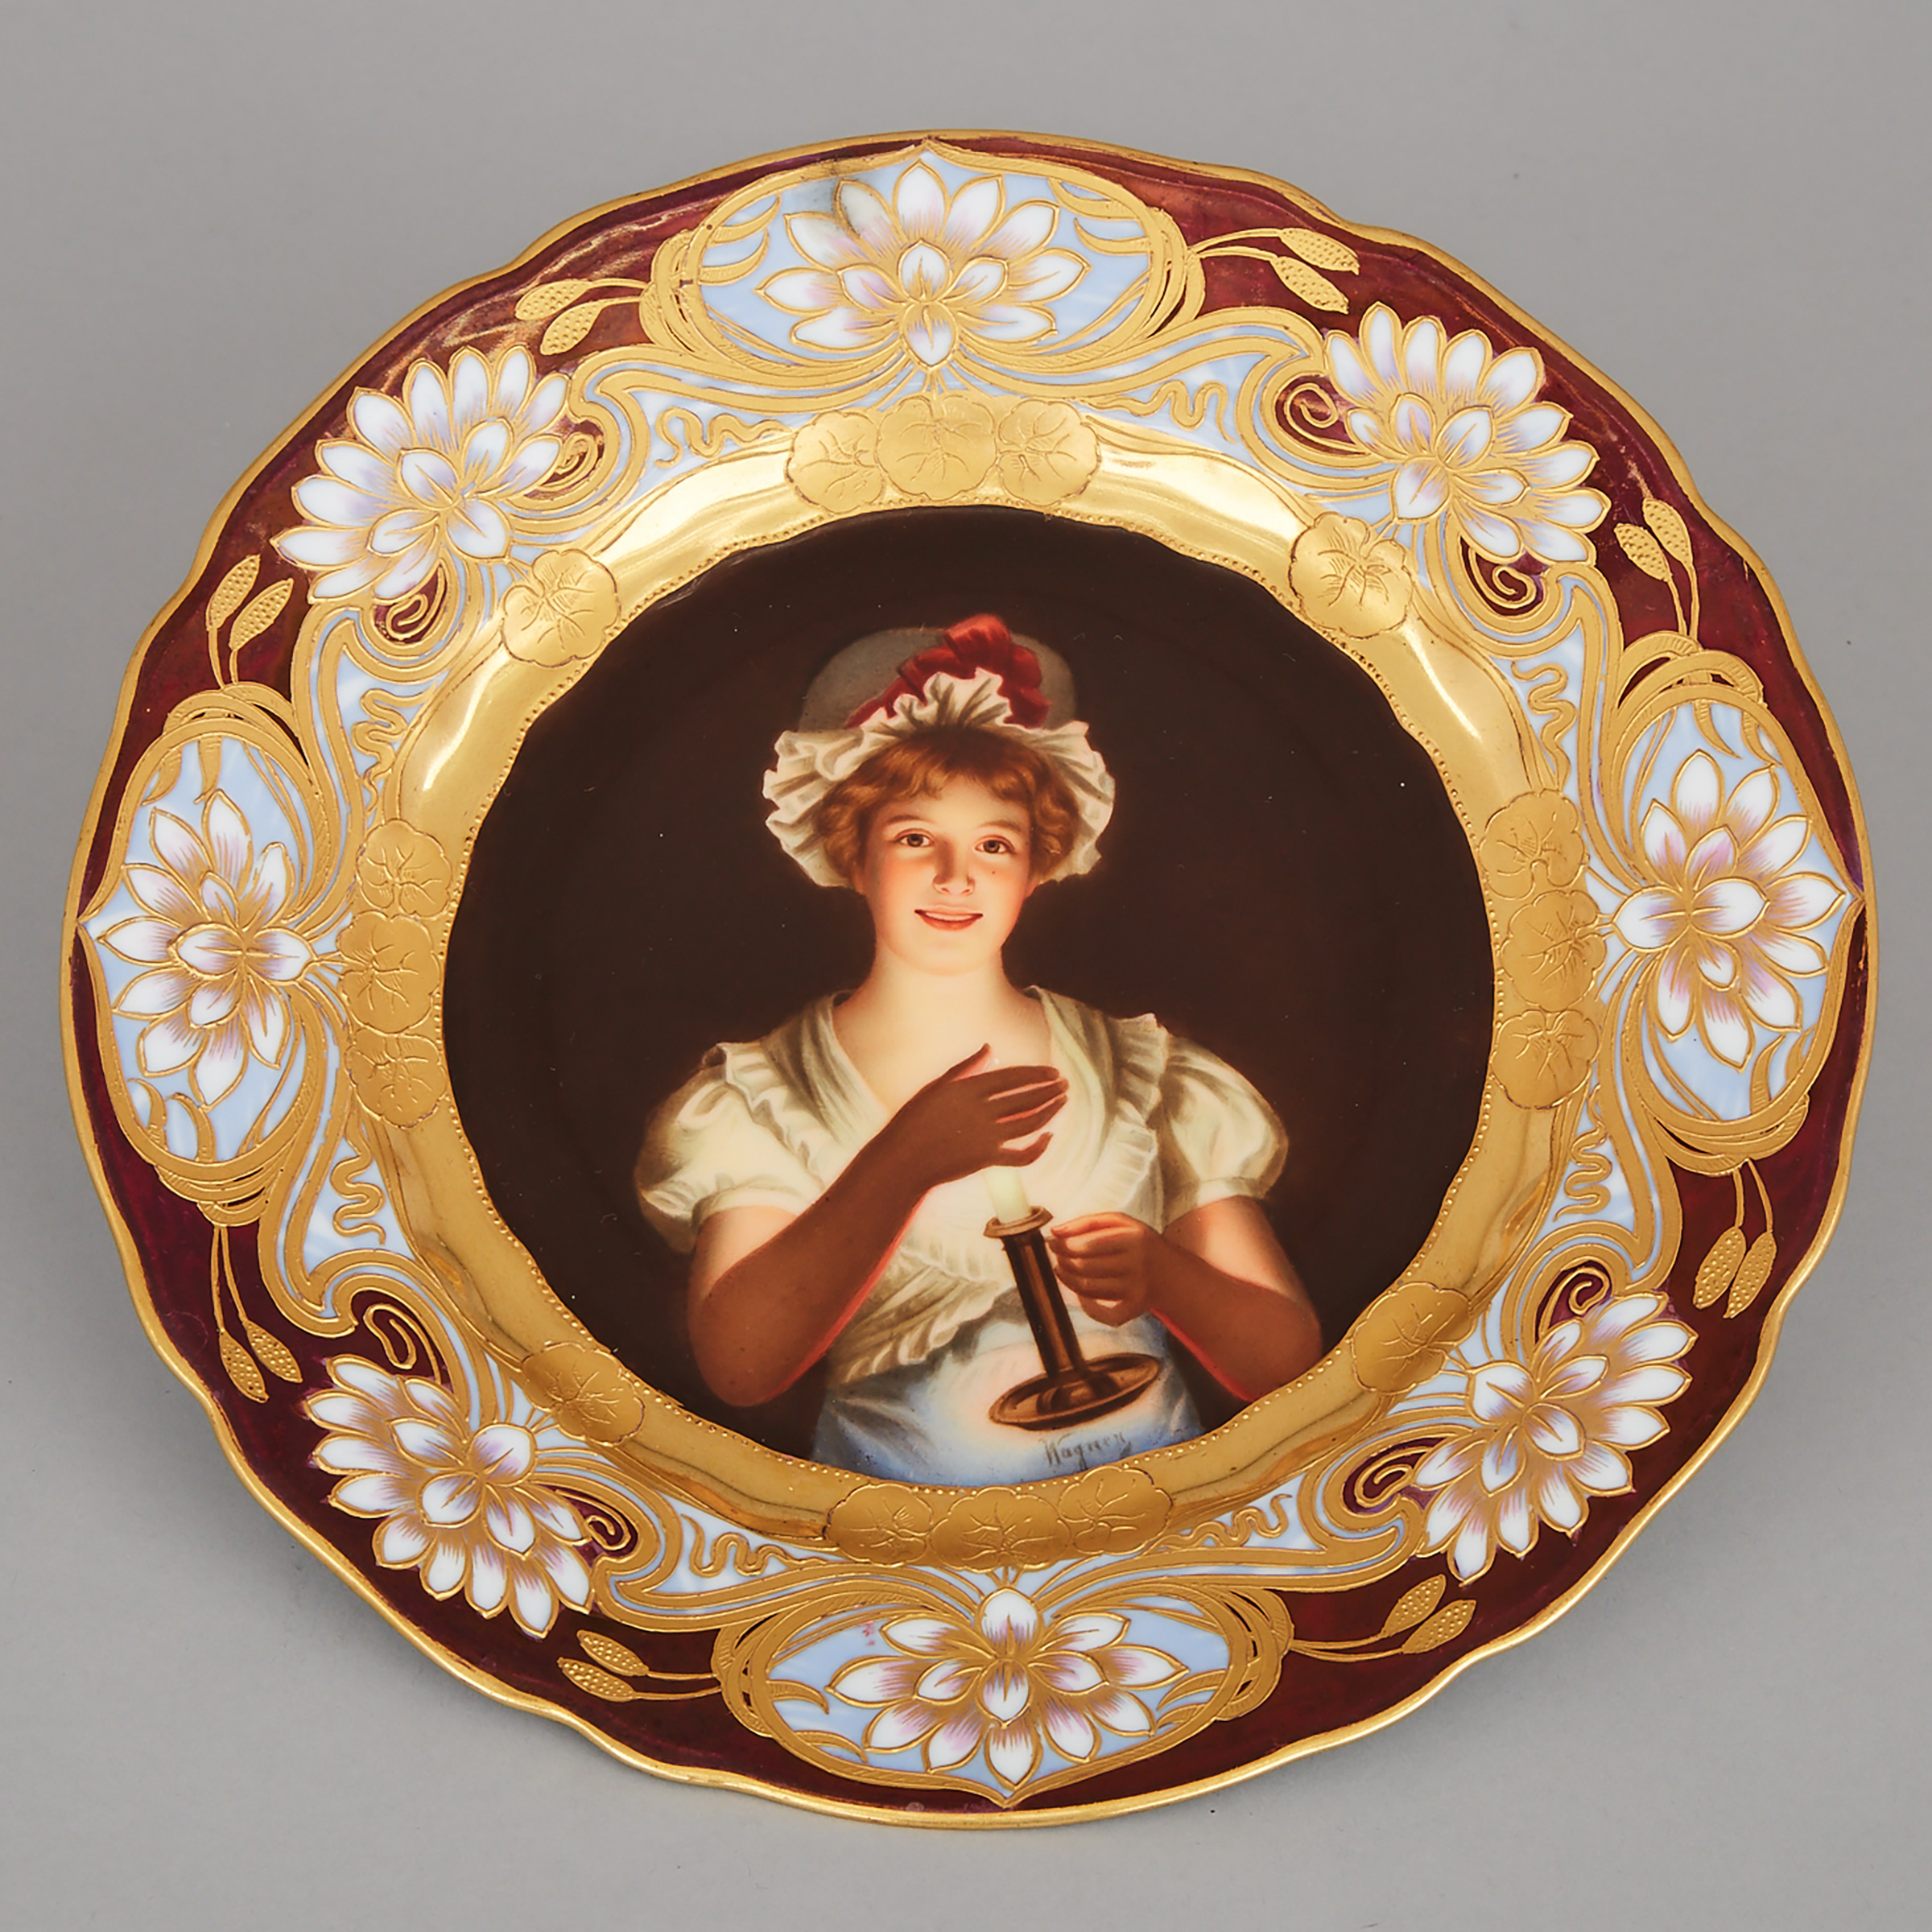 ‘Vienna’ Cabinet Plate, after Georg Hom, c.1900